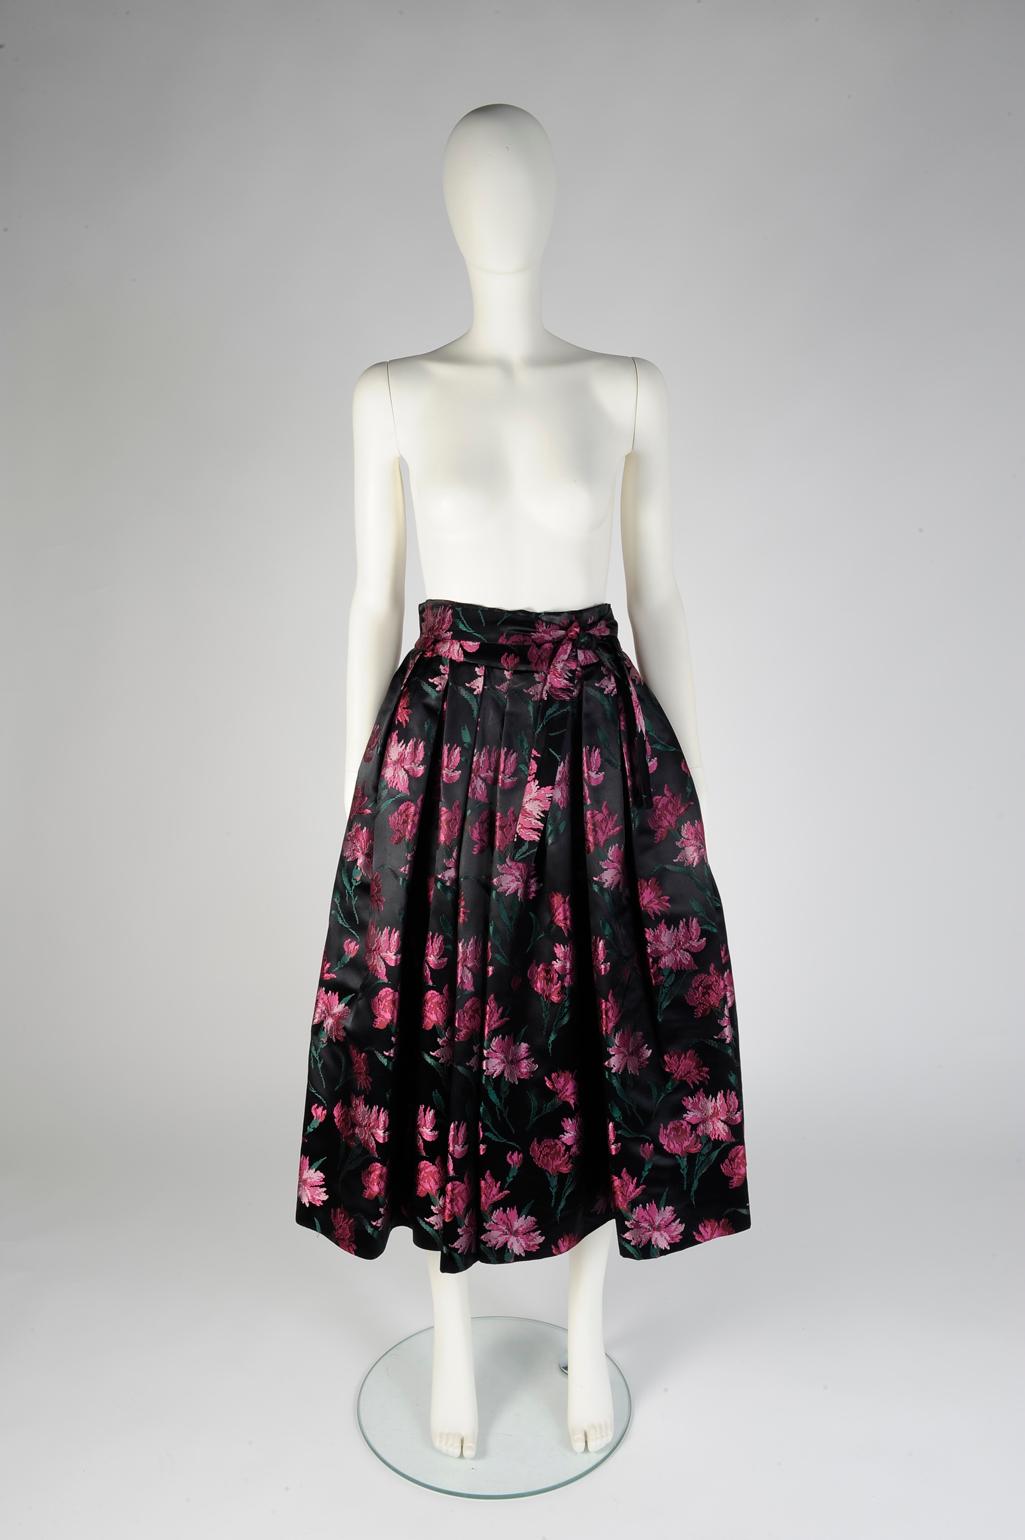 Cut in a gently flared shape, this rare early 50's Christian Dior midi skirt features a high-rise waistband and tonal sash belt. Made from the most lustrous silk damask, this skirt depicts refined pink carnations against a black background. Picture